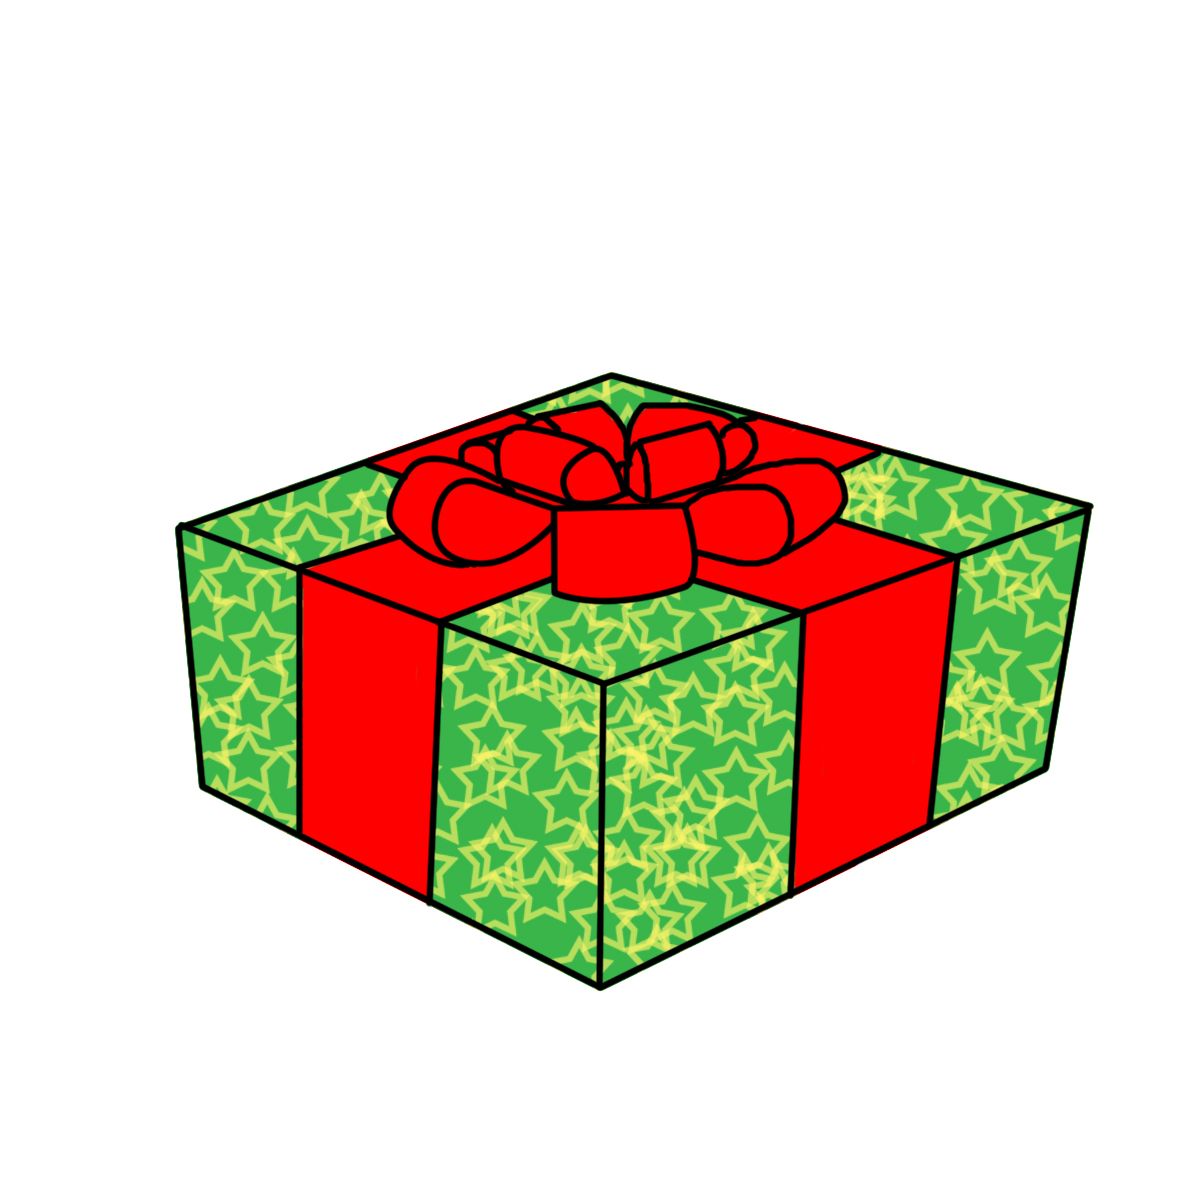 Cartoon Pictures Of Christmas Presents | Free Download Clip Art ...